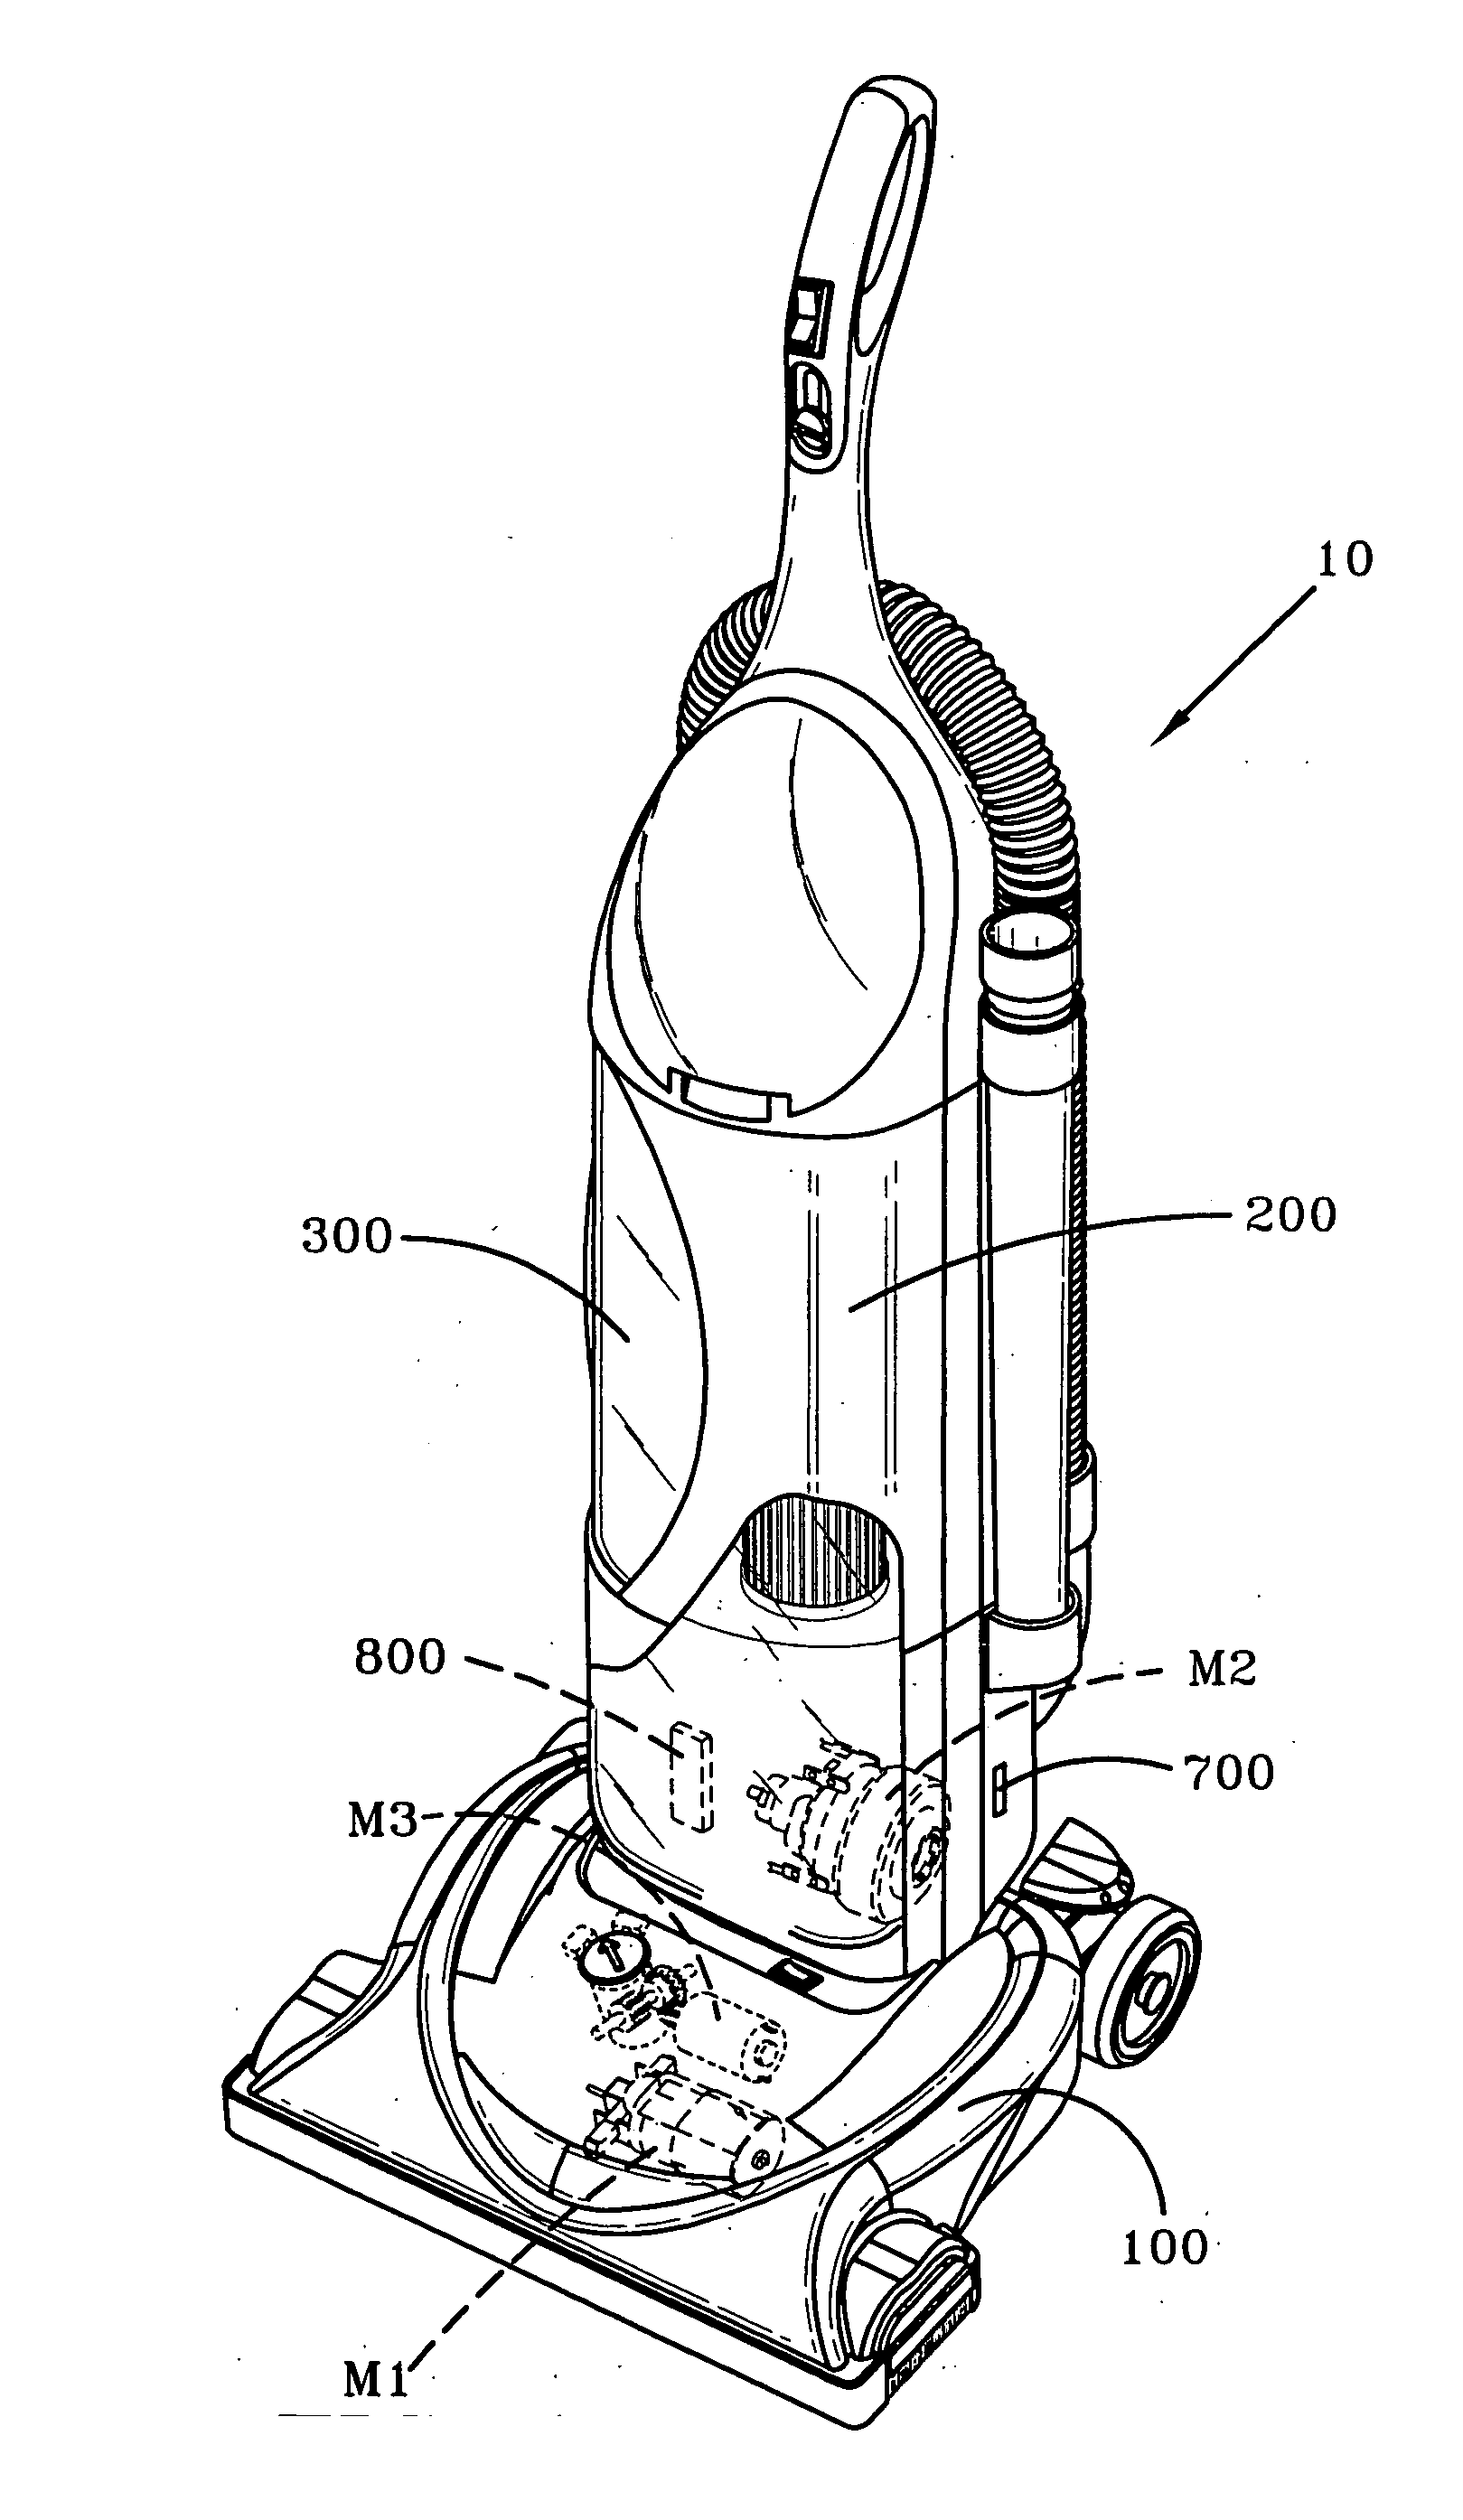 Suction nozzle height adjustment control circuit